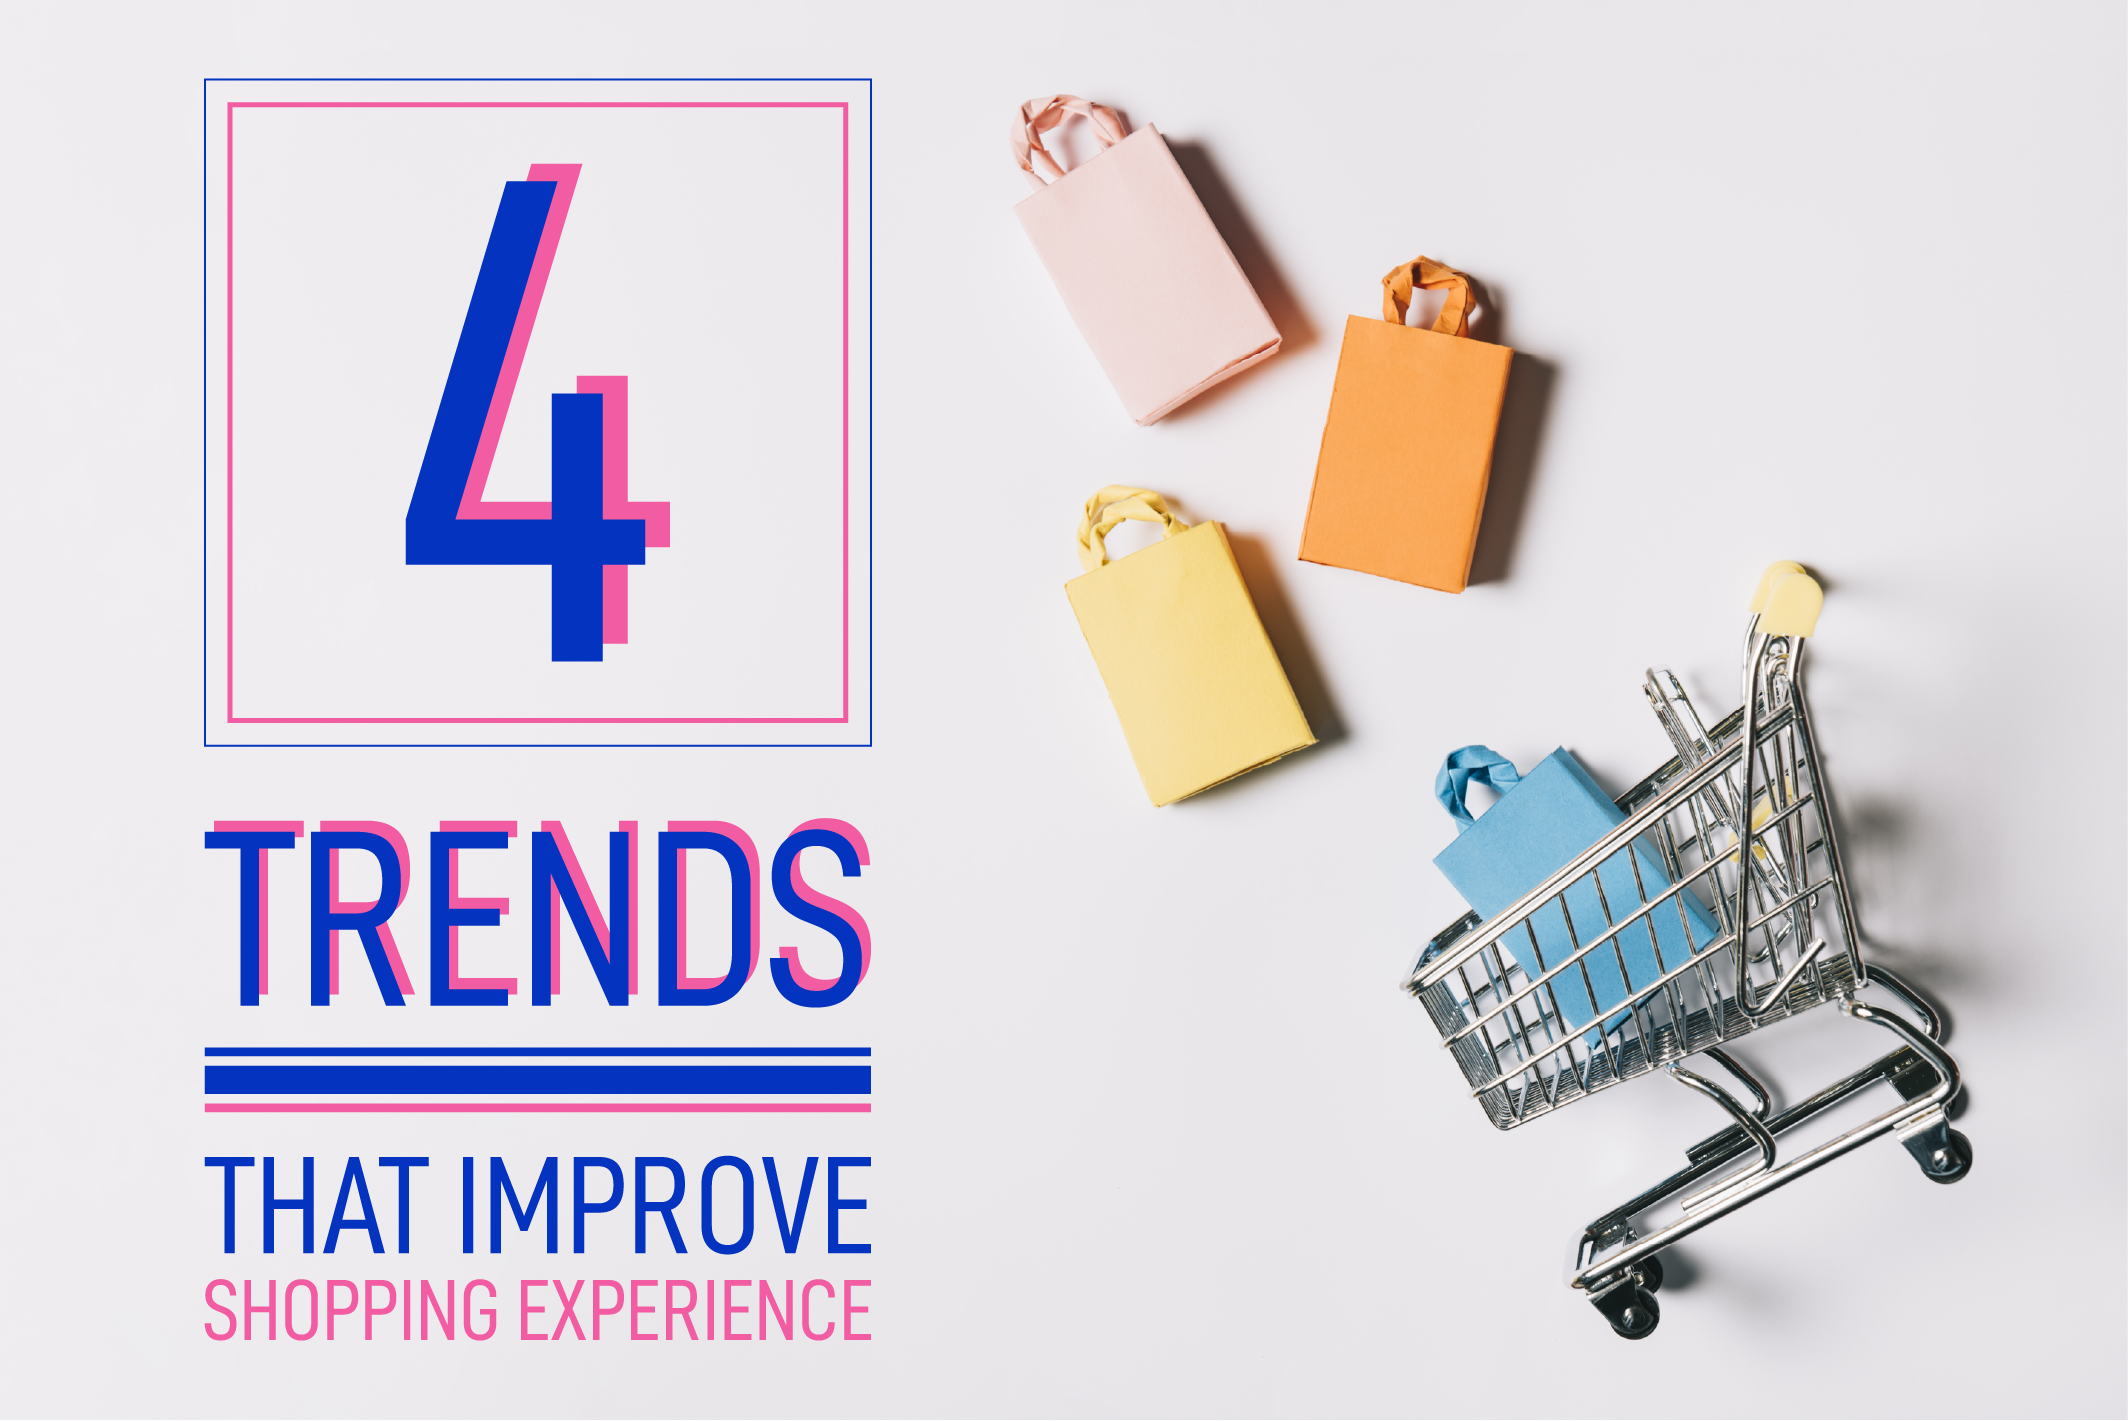 4 trends that improve shopping experience